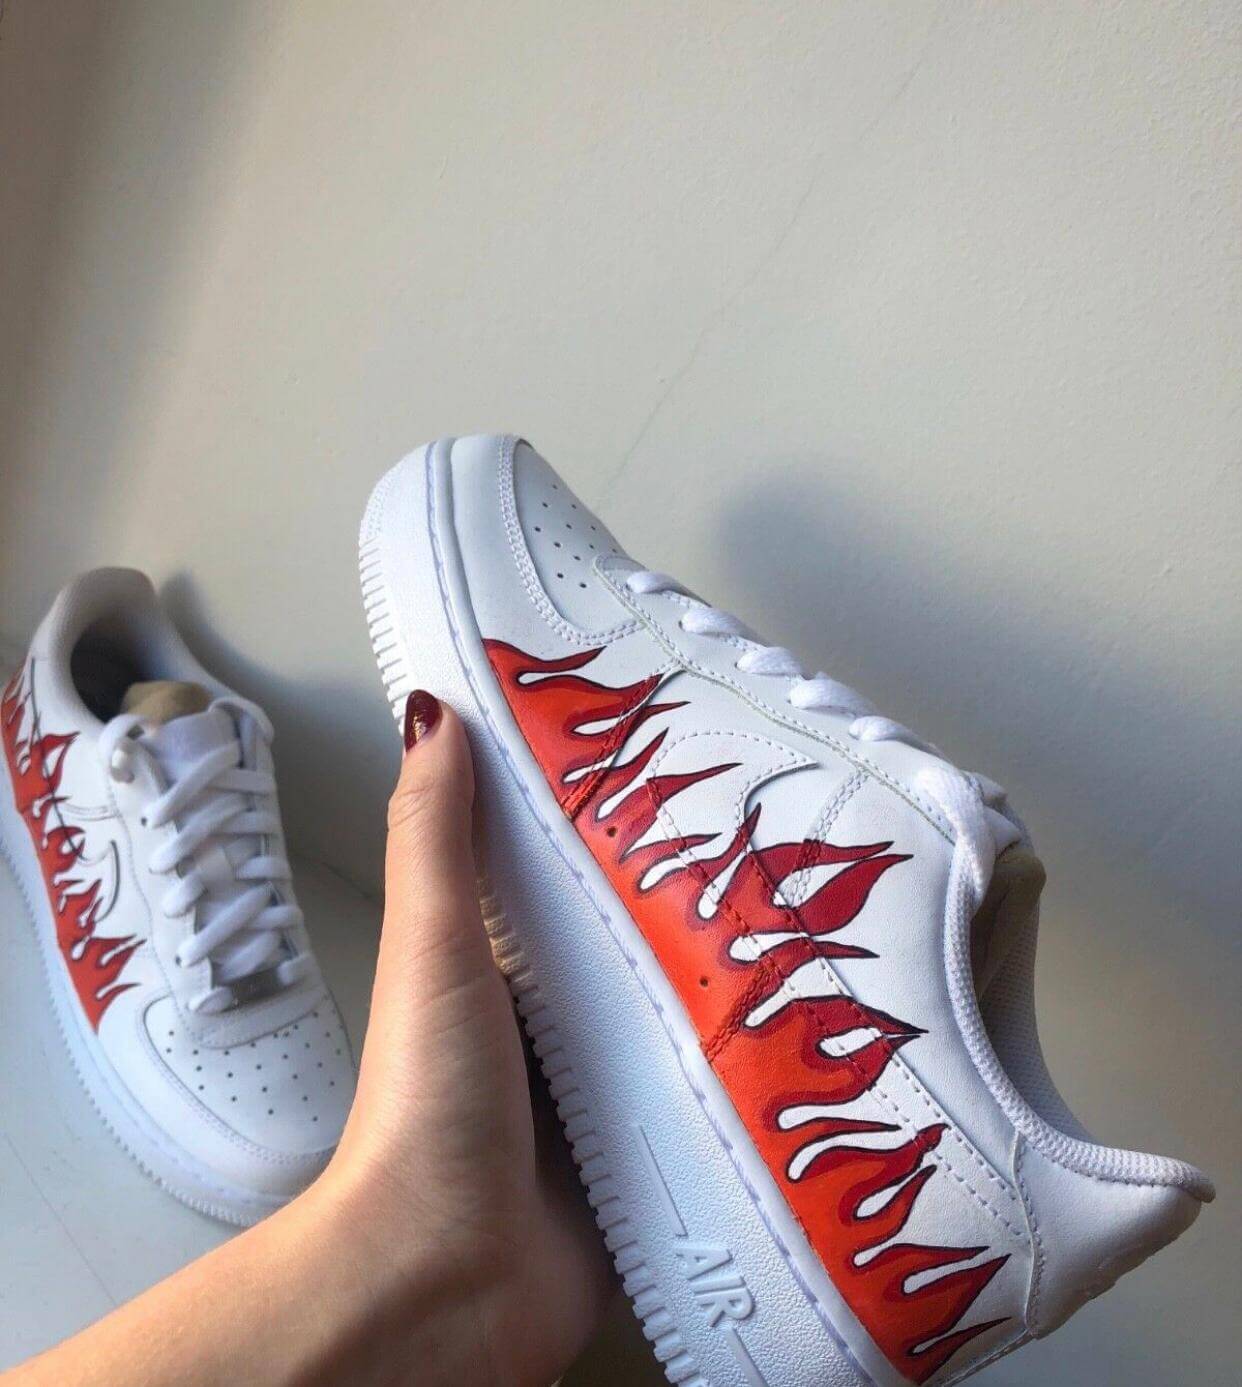 flames red and orange with black outline on well known high end brand nike, air force 1 these are hand painted designs